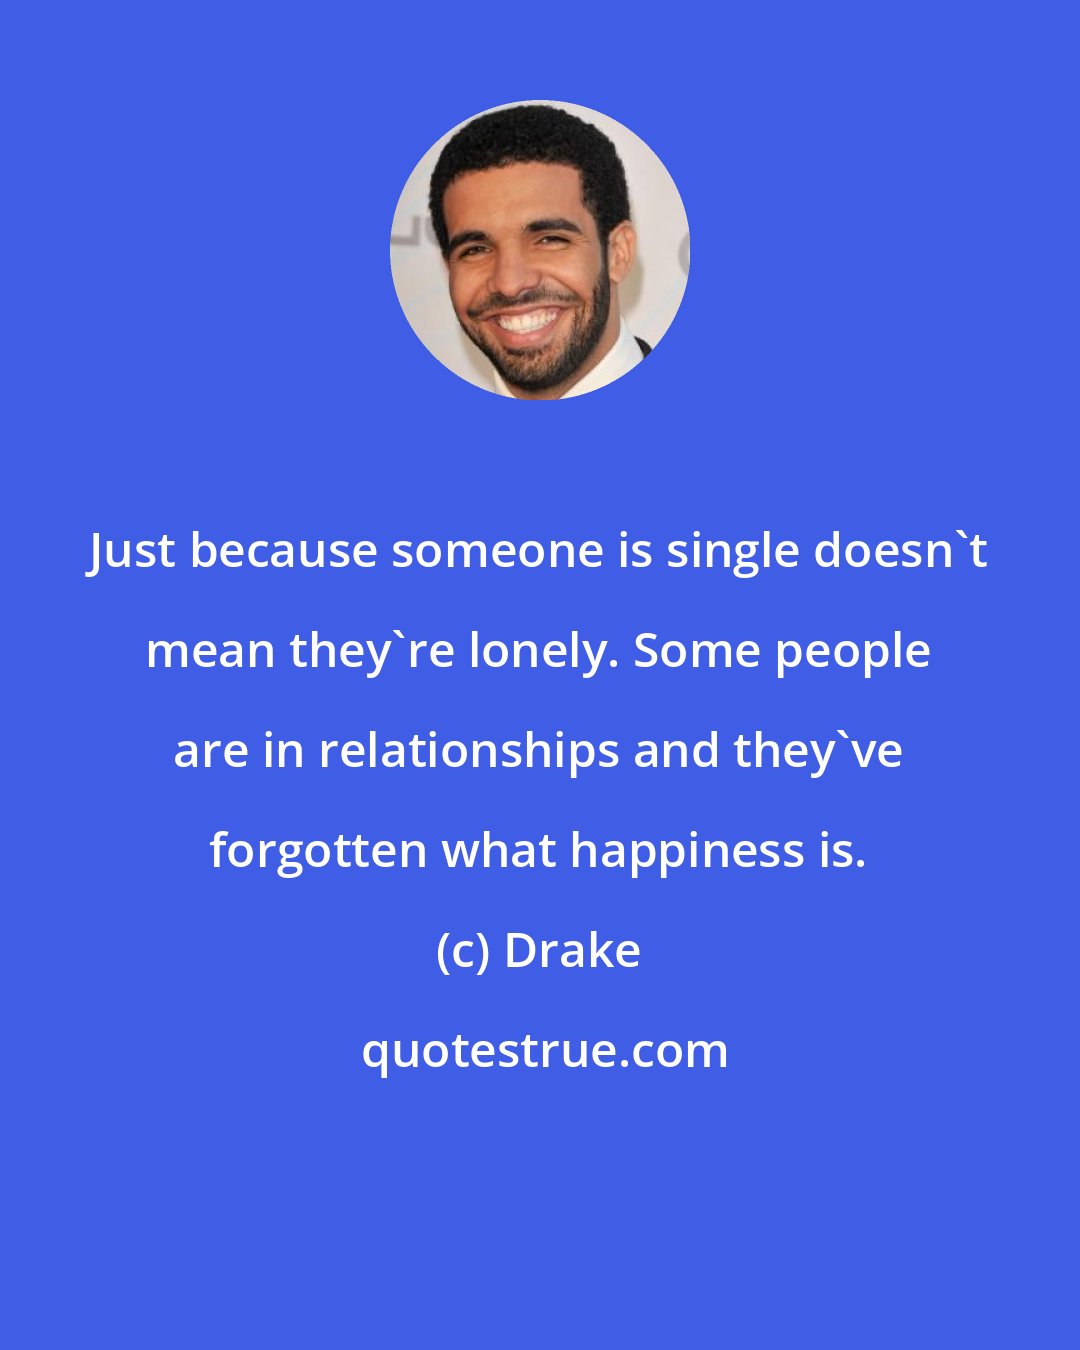 Drake: Just because someone is single doesn't mean they're lonely. Some people are in relationships and they've forgotten what happiness is.